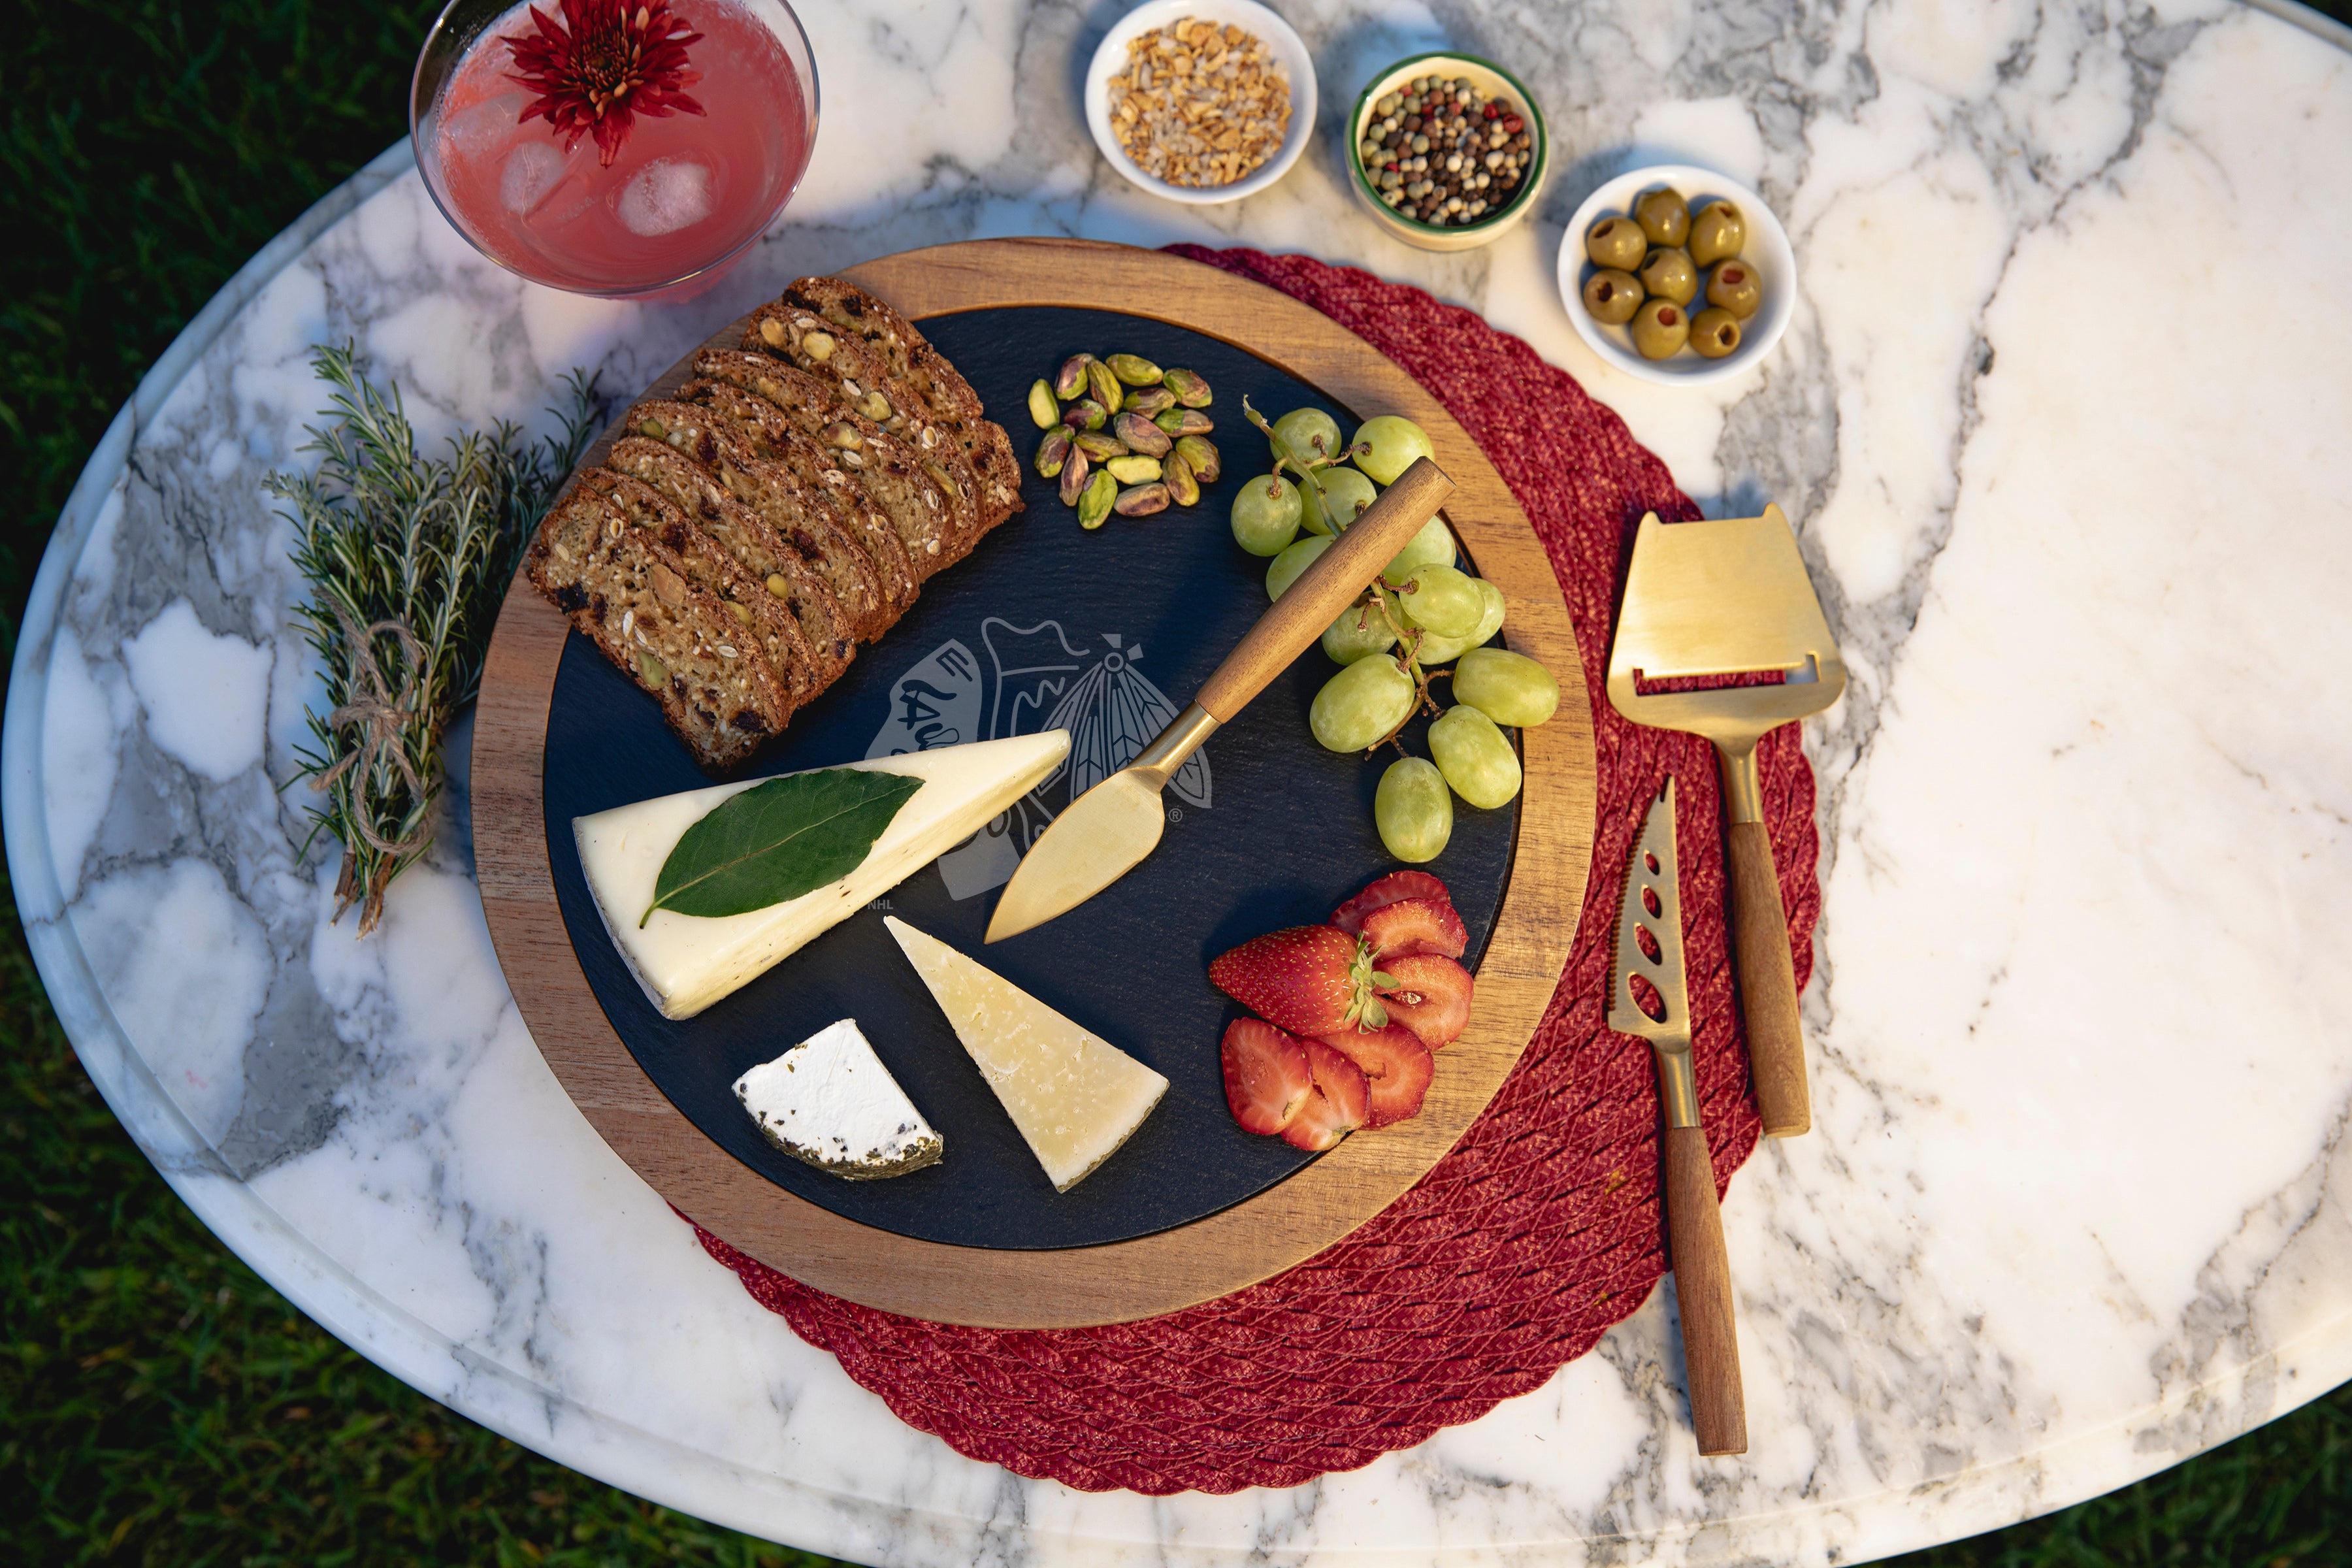 Chicago Blackhawks - Insignia Acacia and Slate Serving Board with Cheese Tools